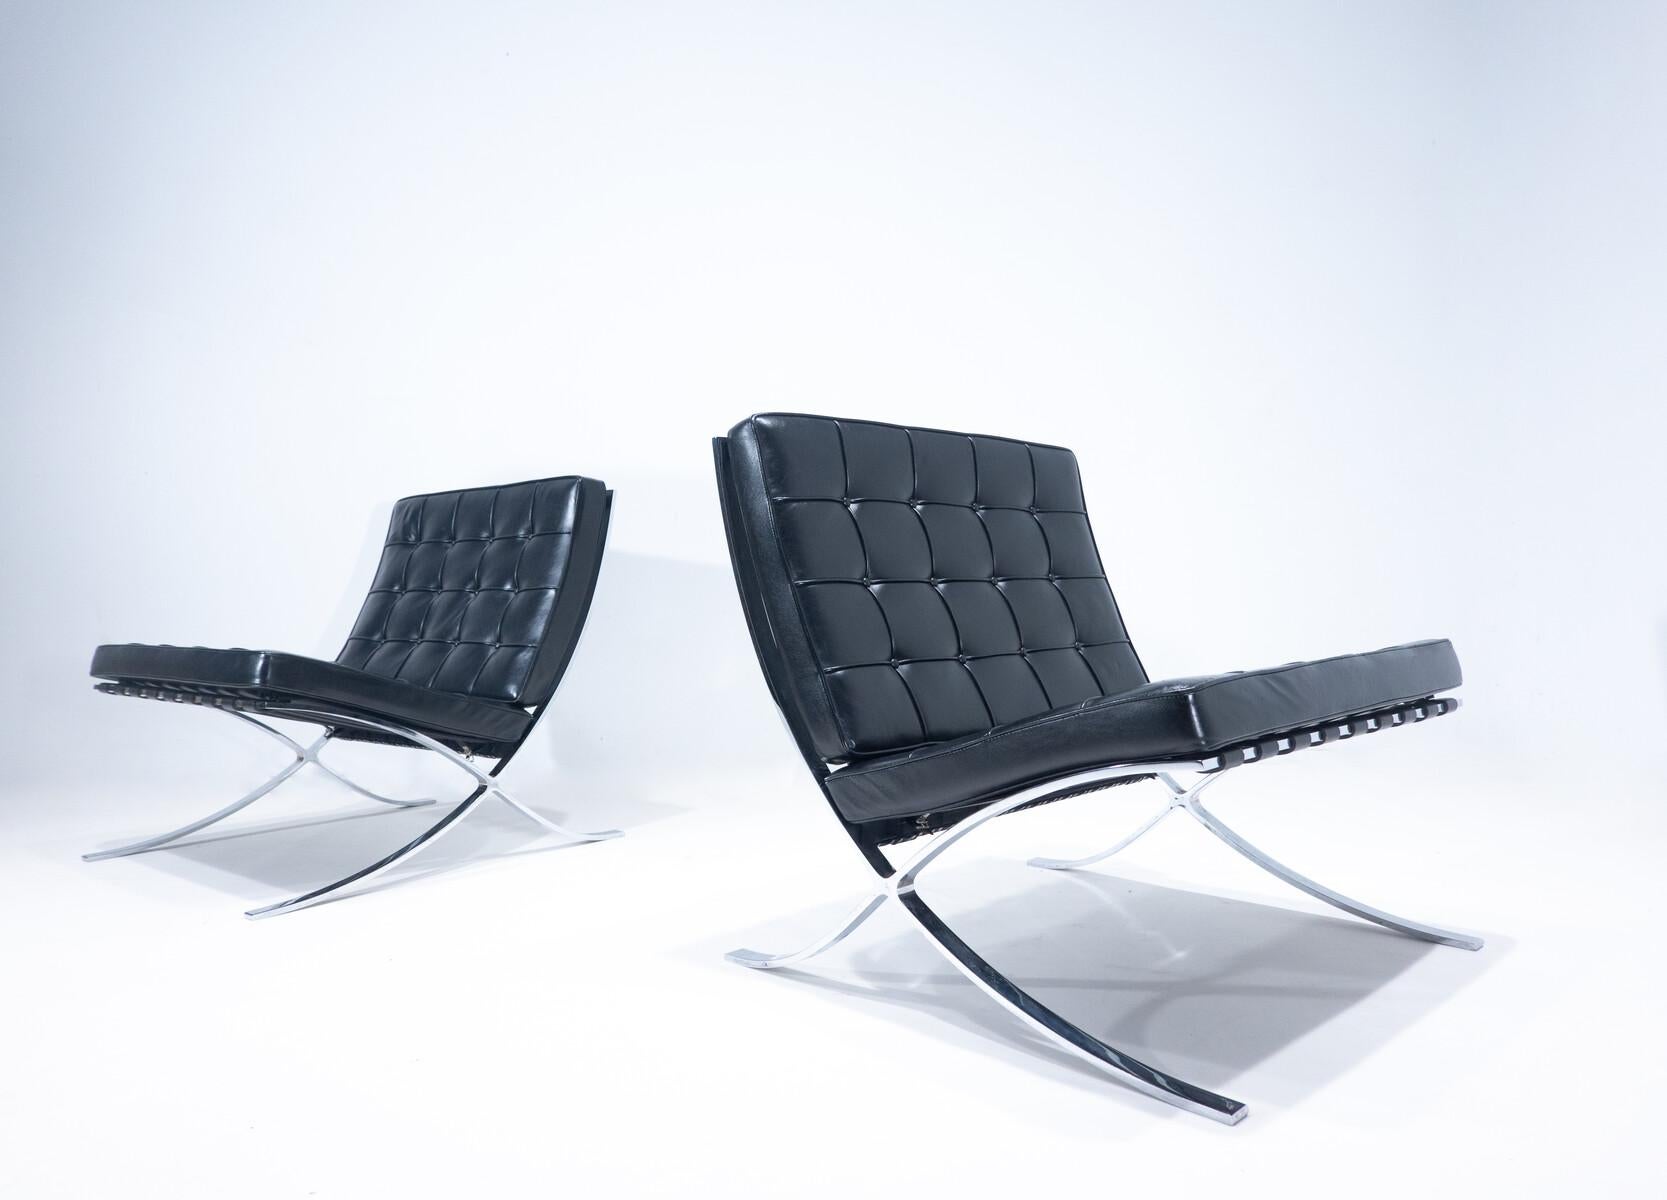 Pair of Black Leather Barcelona Chairs by Mies Van Der Rohe for Knoll, 1960s For Sale 5